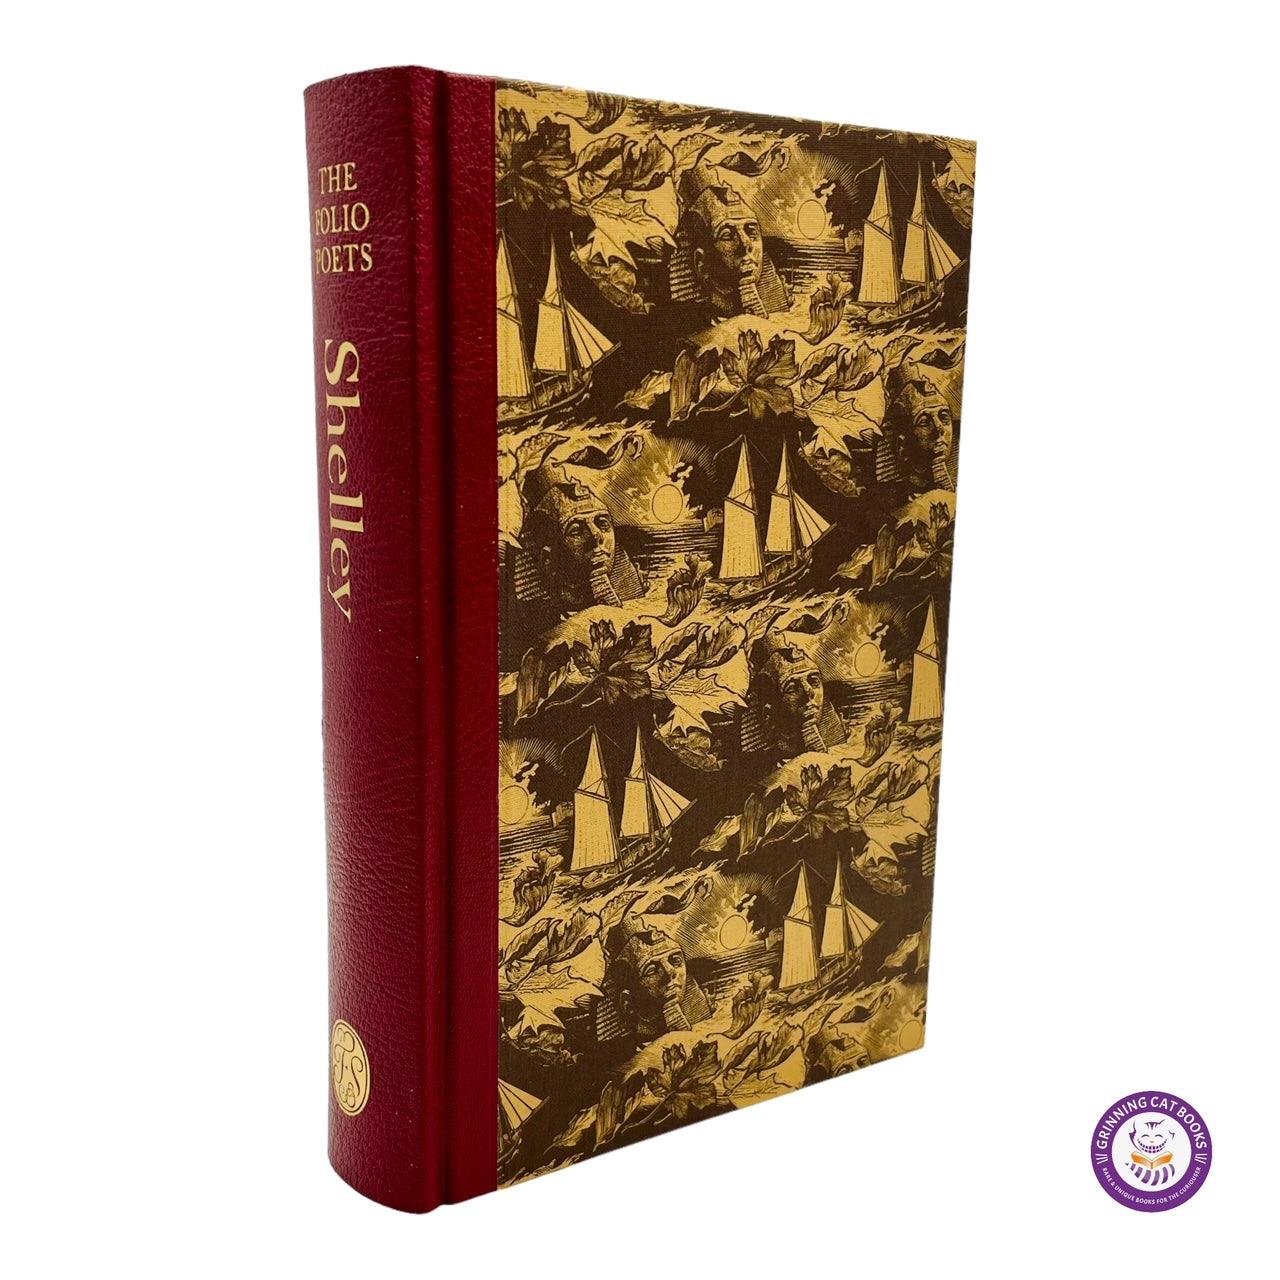 Shelley (deluxe "Folio Poets" edition by the Folio Society) - Grinning Cat Books - books - POETRY